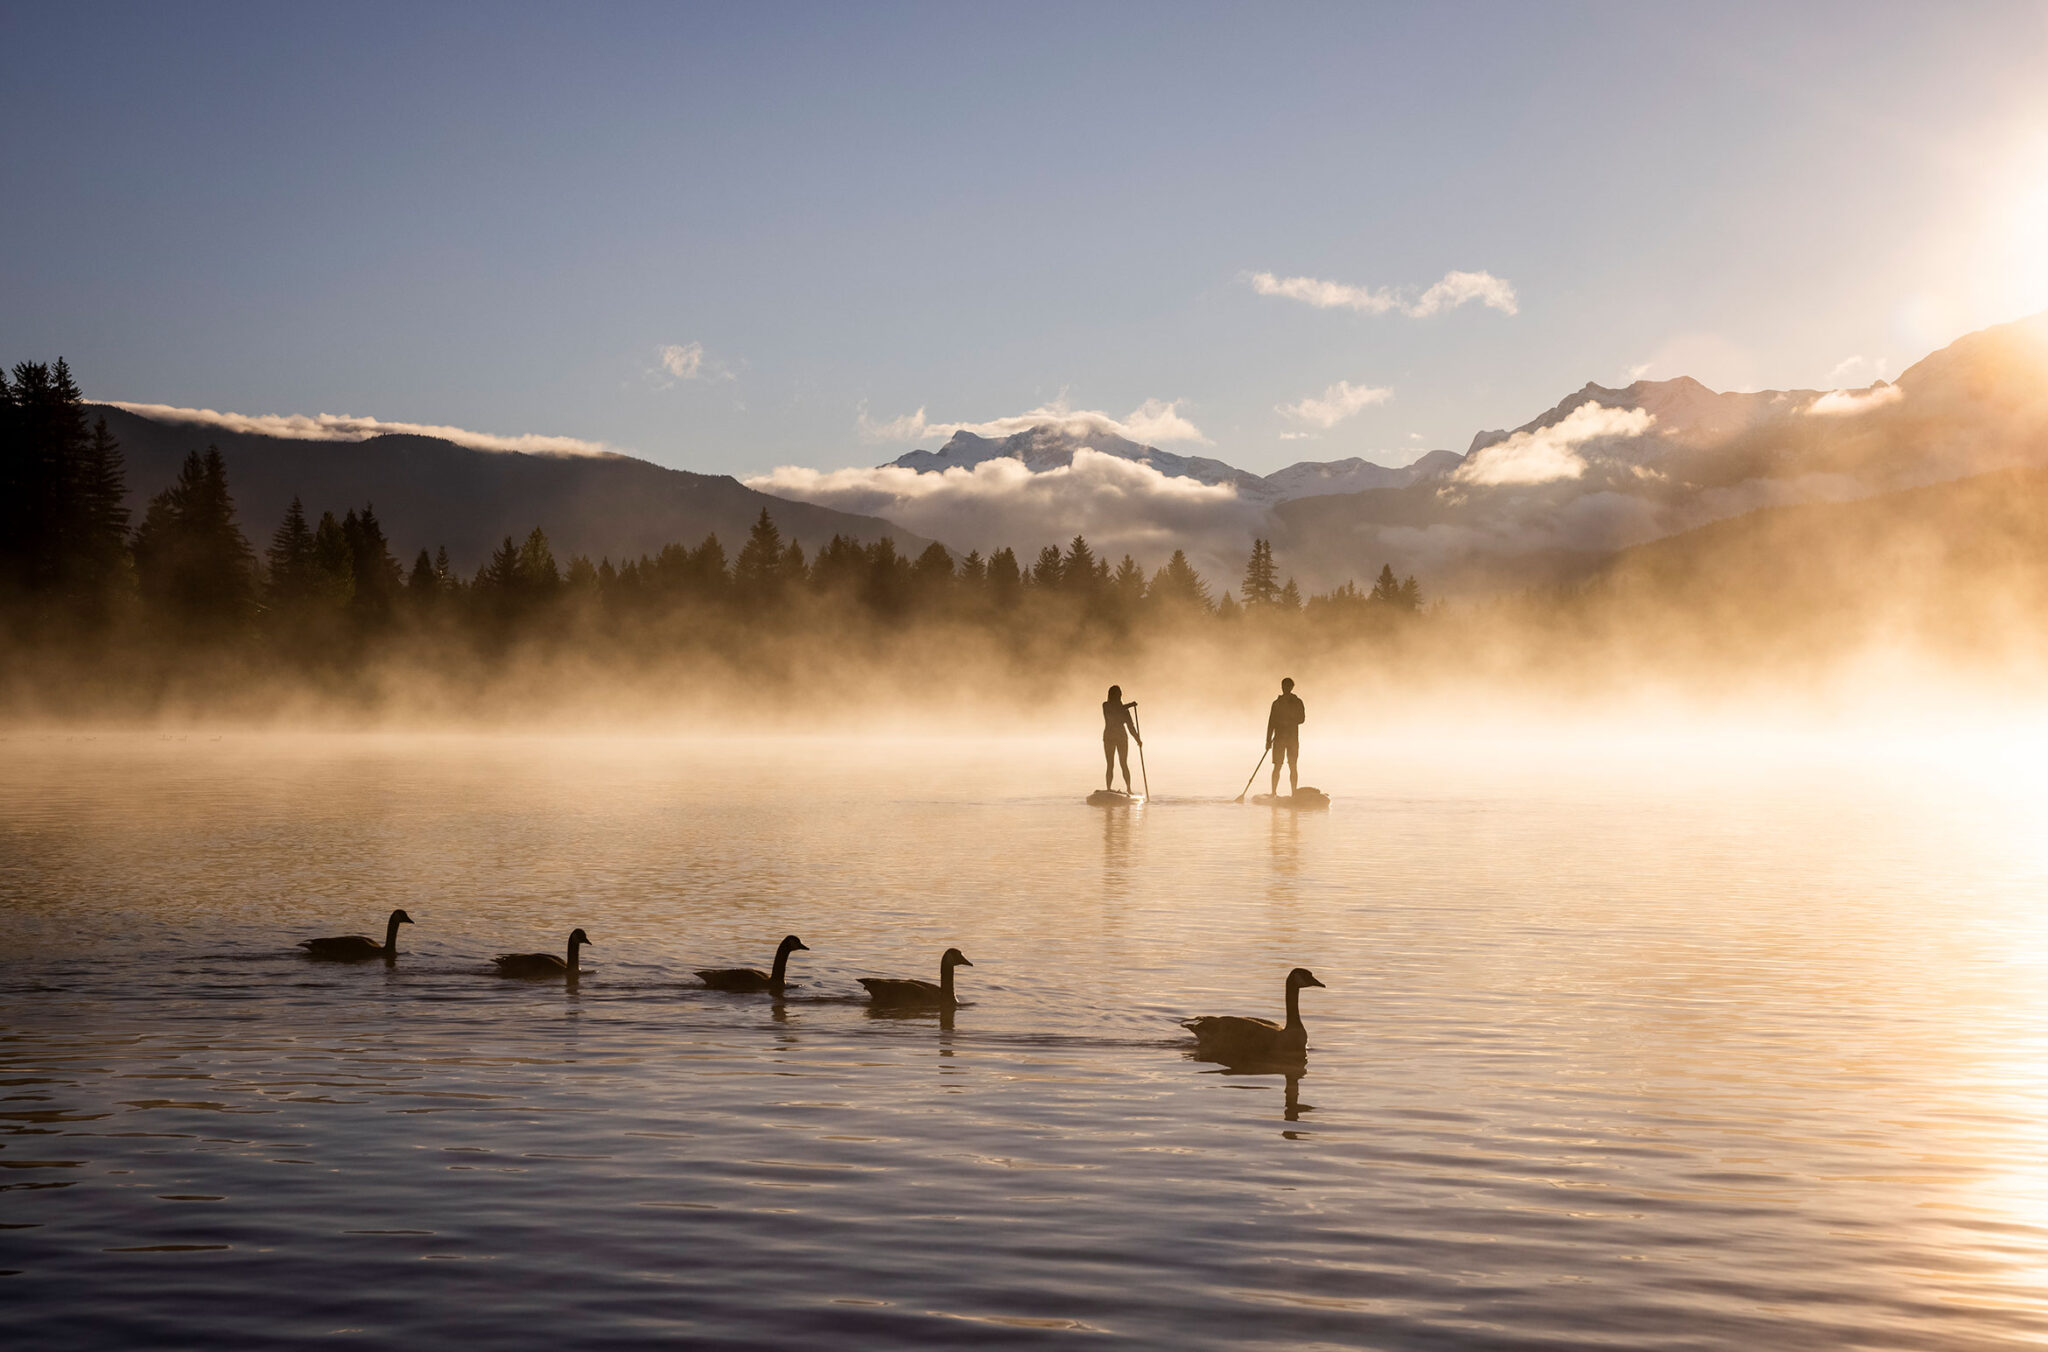 Two stand up paddle boarders head out on a calm lake as a group of swans glide in front of them at sunrise in Whistler.